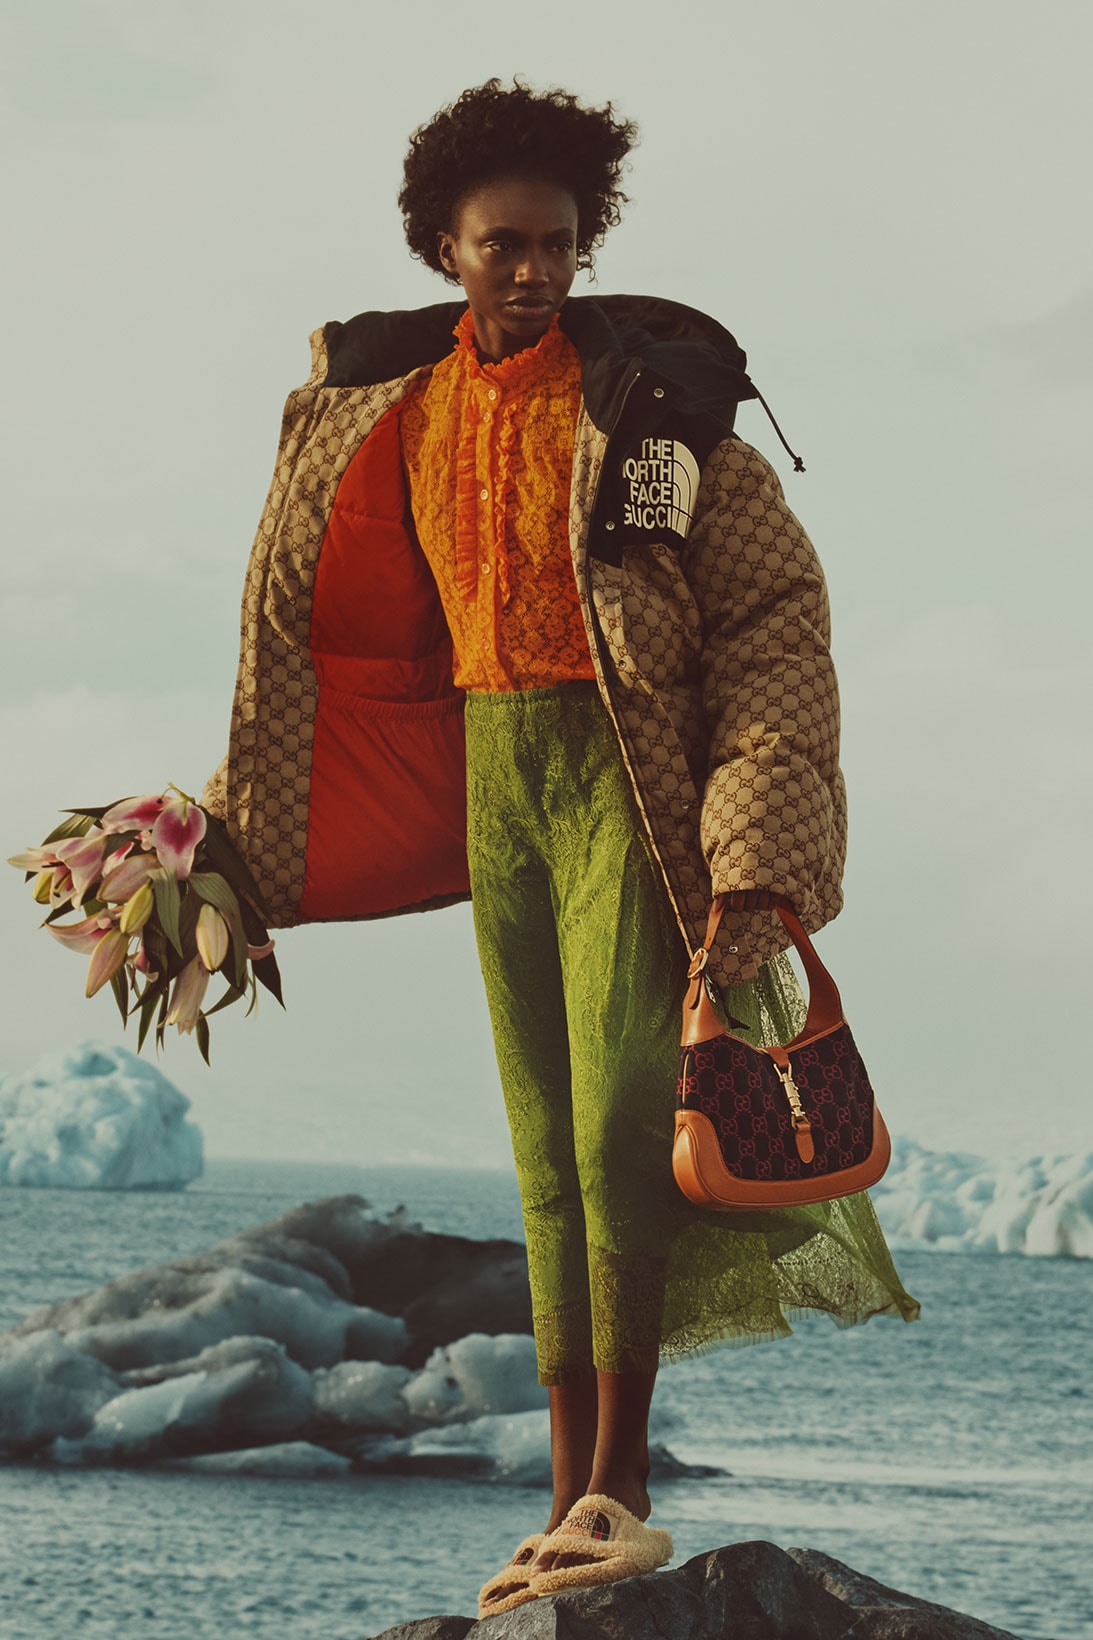 Gucci & The North Face Full FW21 Collaboration: Where to Buy